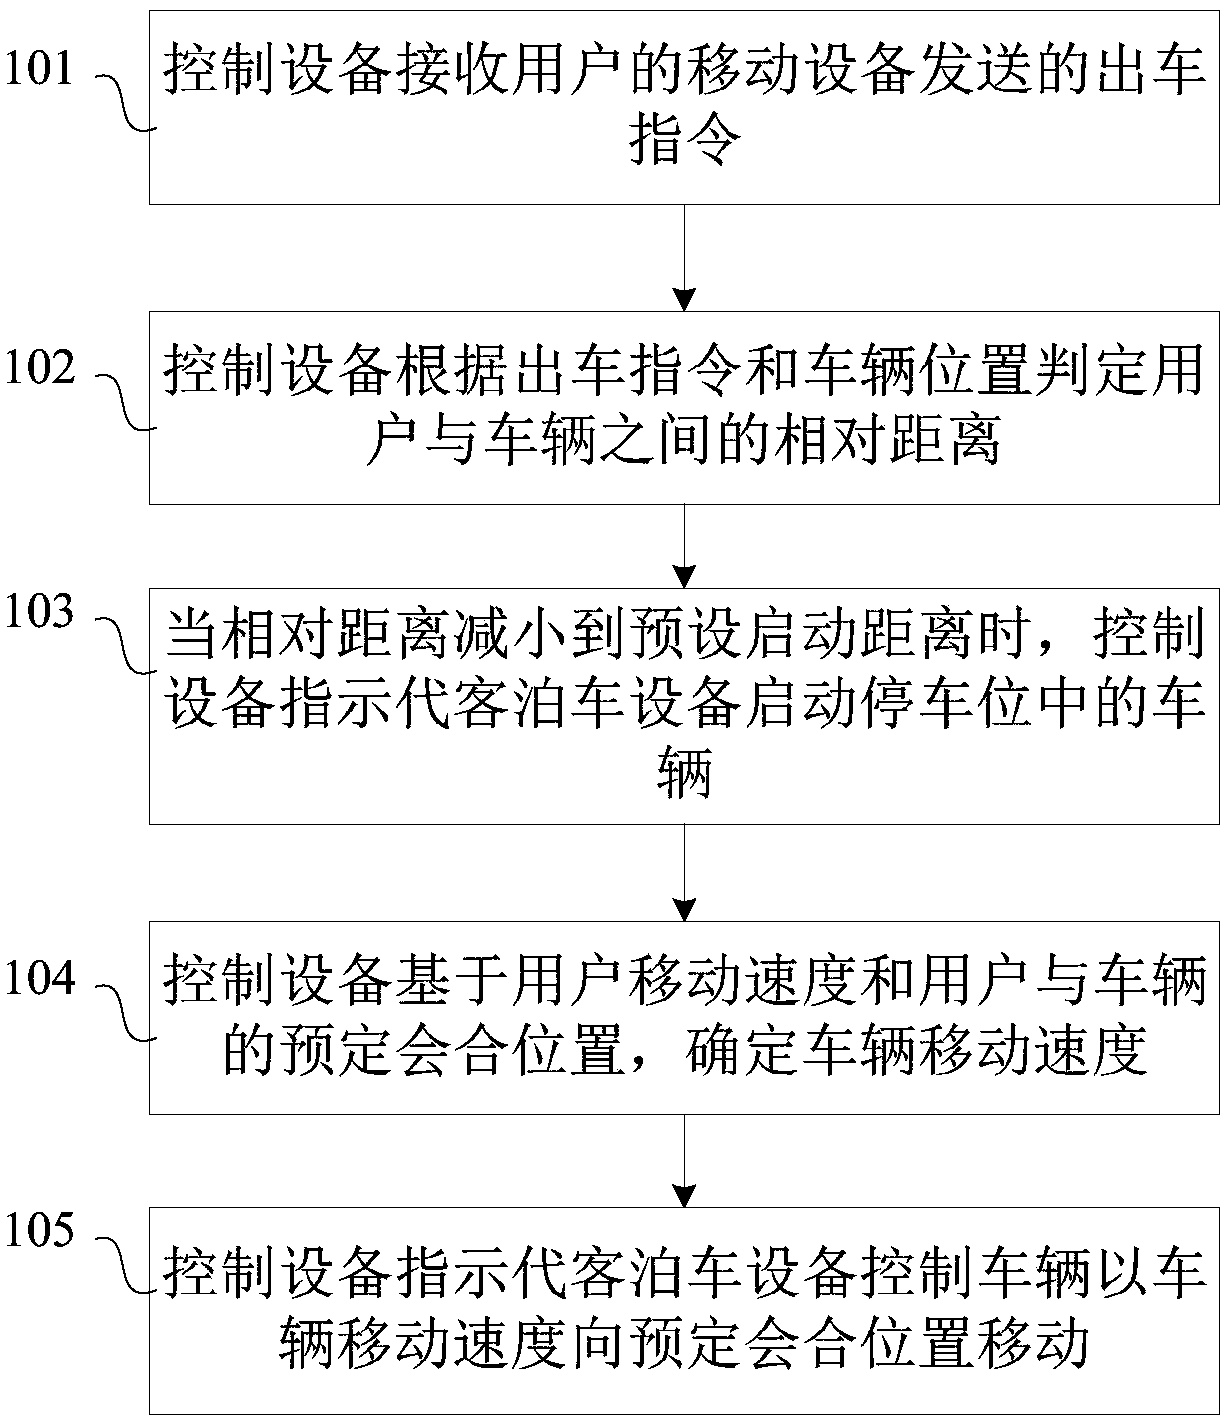 Vehicle automatic control method, equipment and system